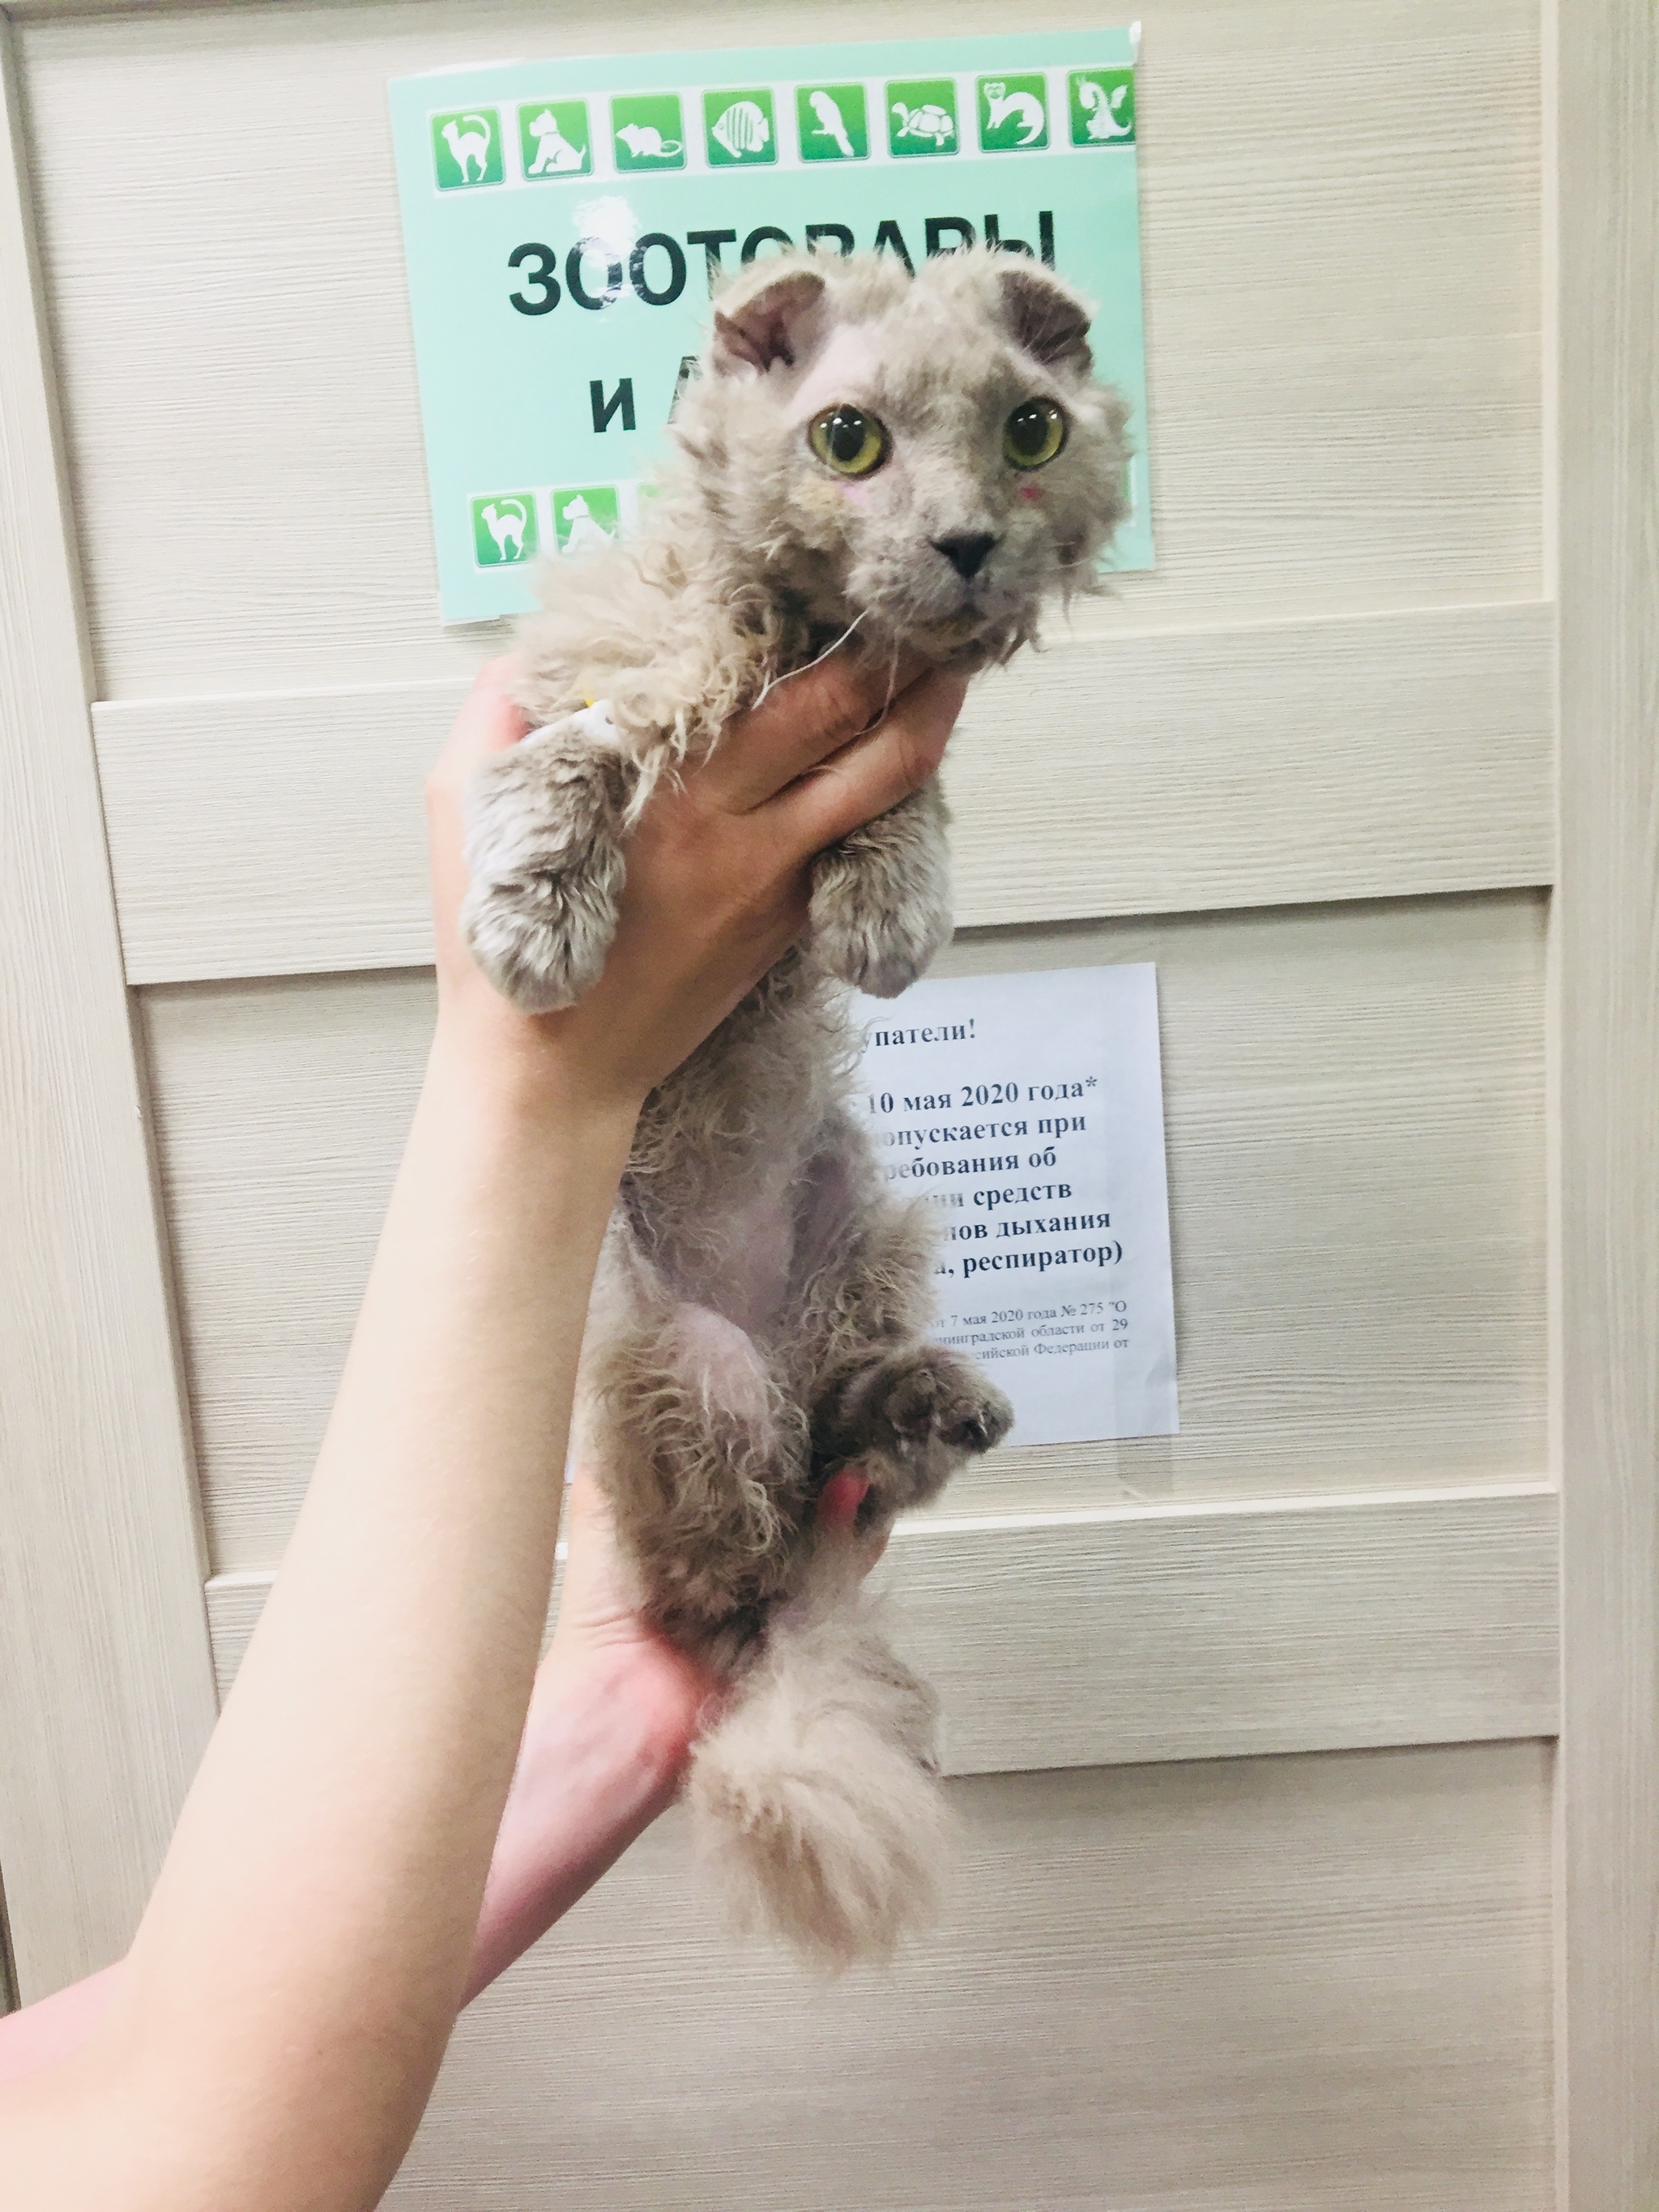 Continuation of the post “The fold-eared cat really needs help. St. Petersburg and Leningrad Region - My, cat, Animal Rescue, In good hands, Saint Petersburg, Leningrad region, Ukrainian Levkoy, Video, Reply to post, Longpost